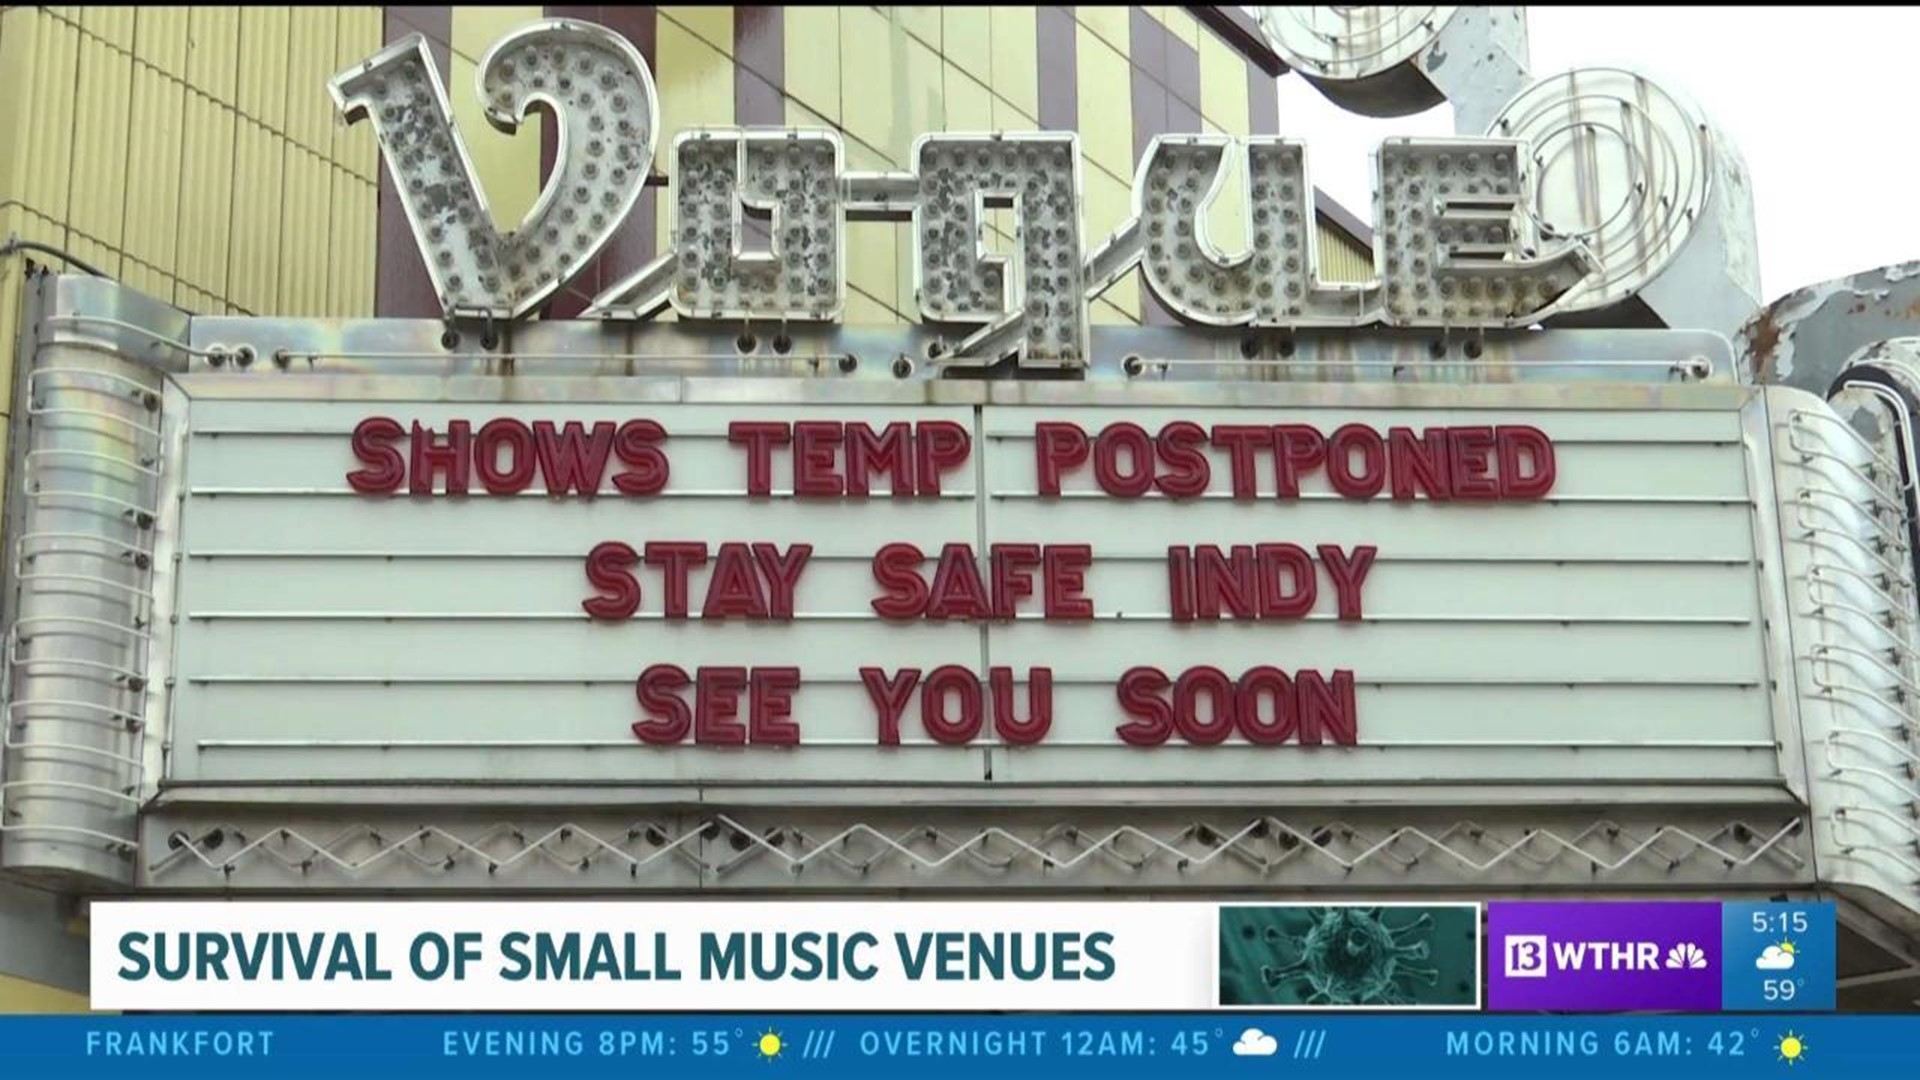 Survival of small music venues